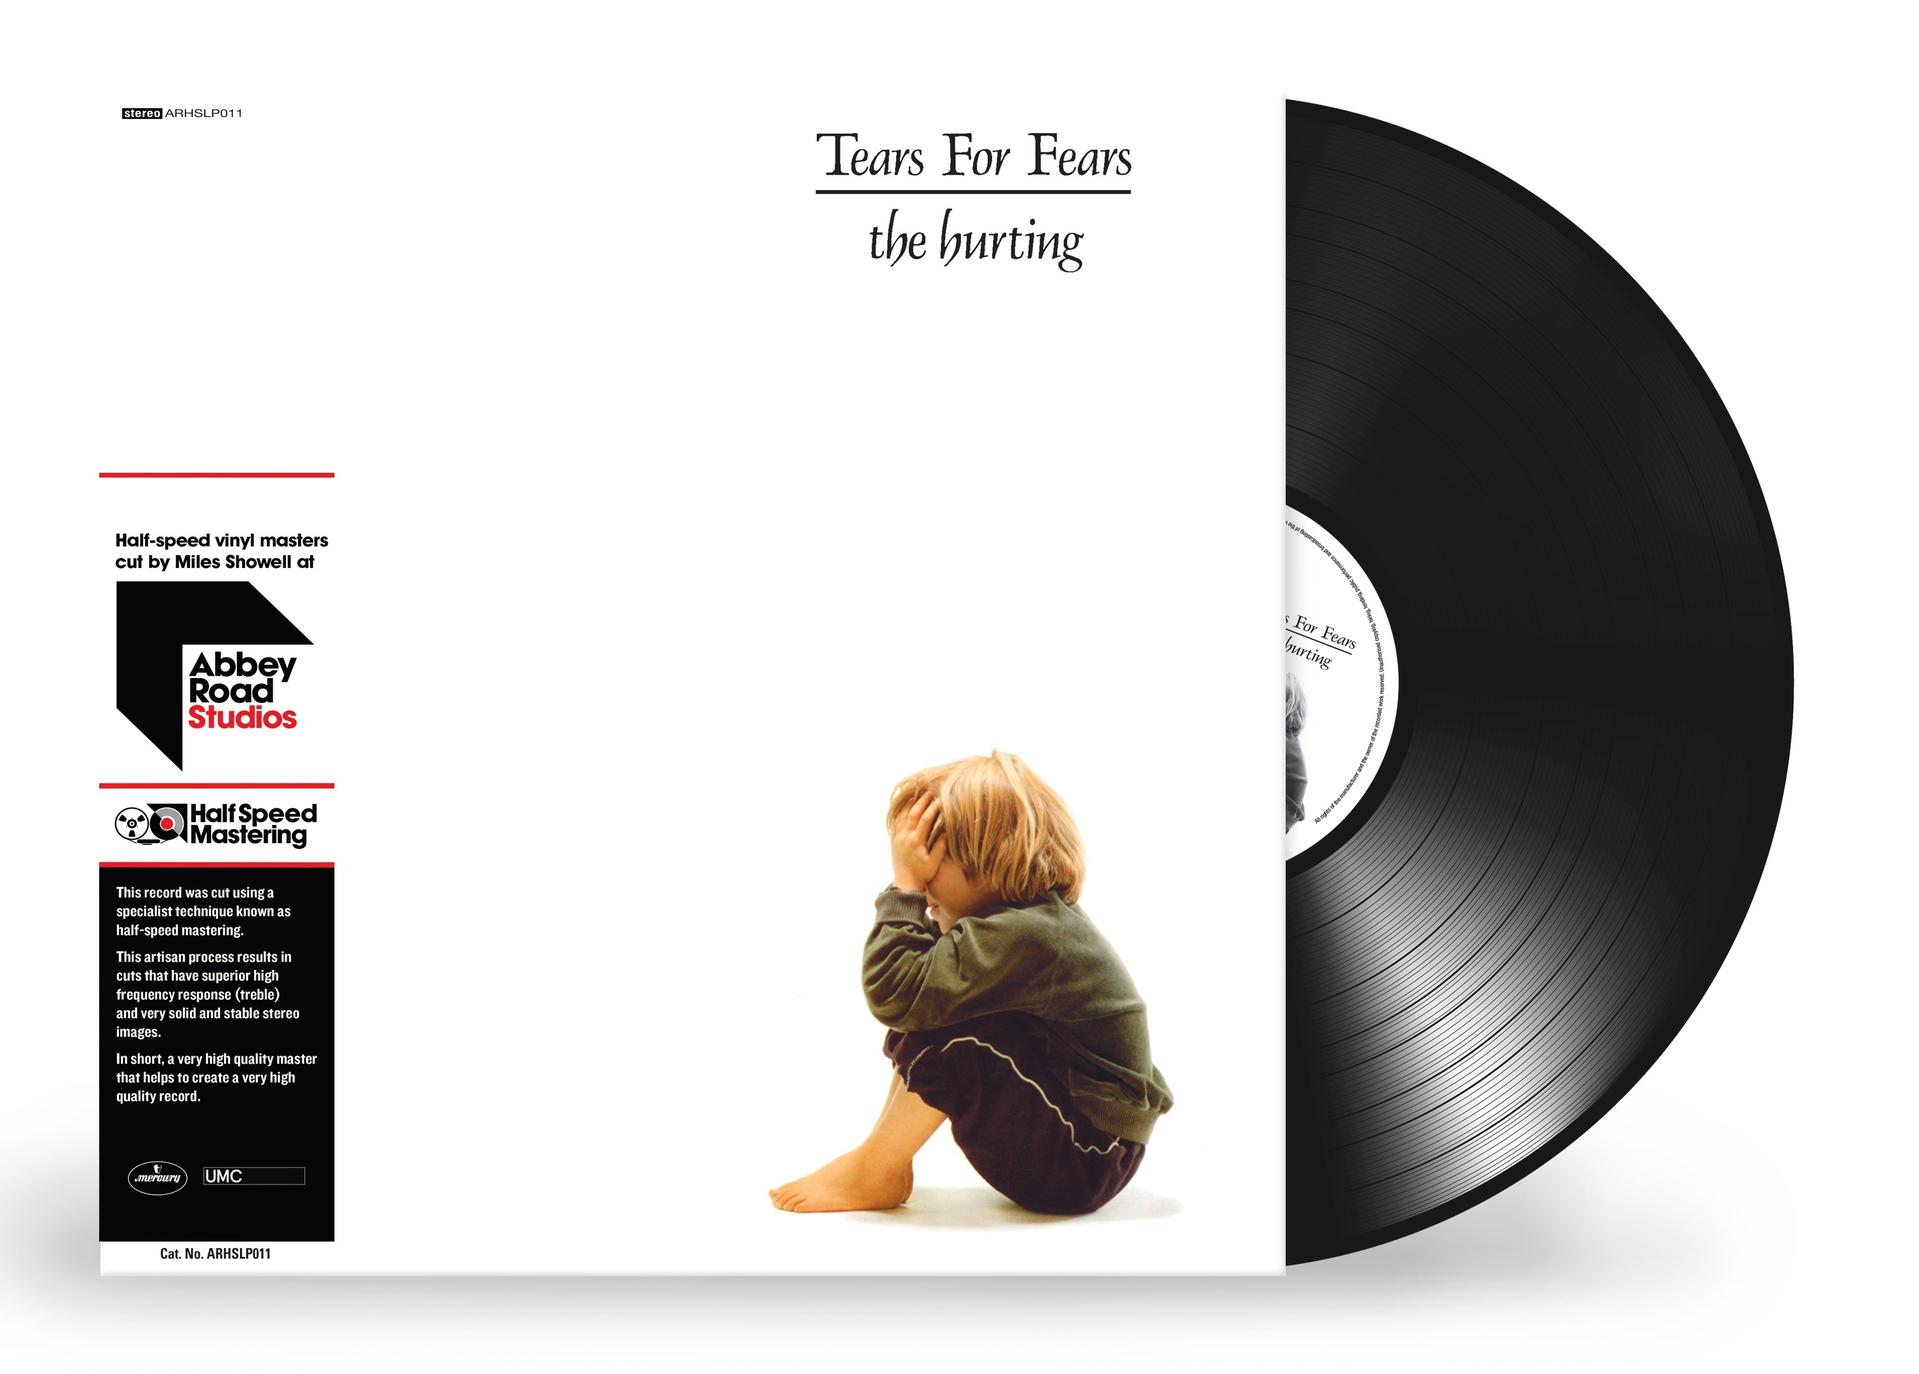 Remastered The (Half-Speed (Vinyl) Ltd.1LP) - - Fears Tears Hurting For 2021